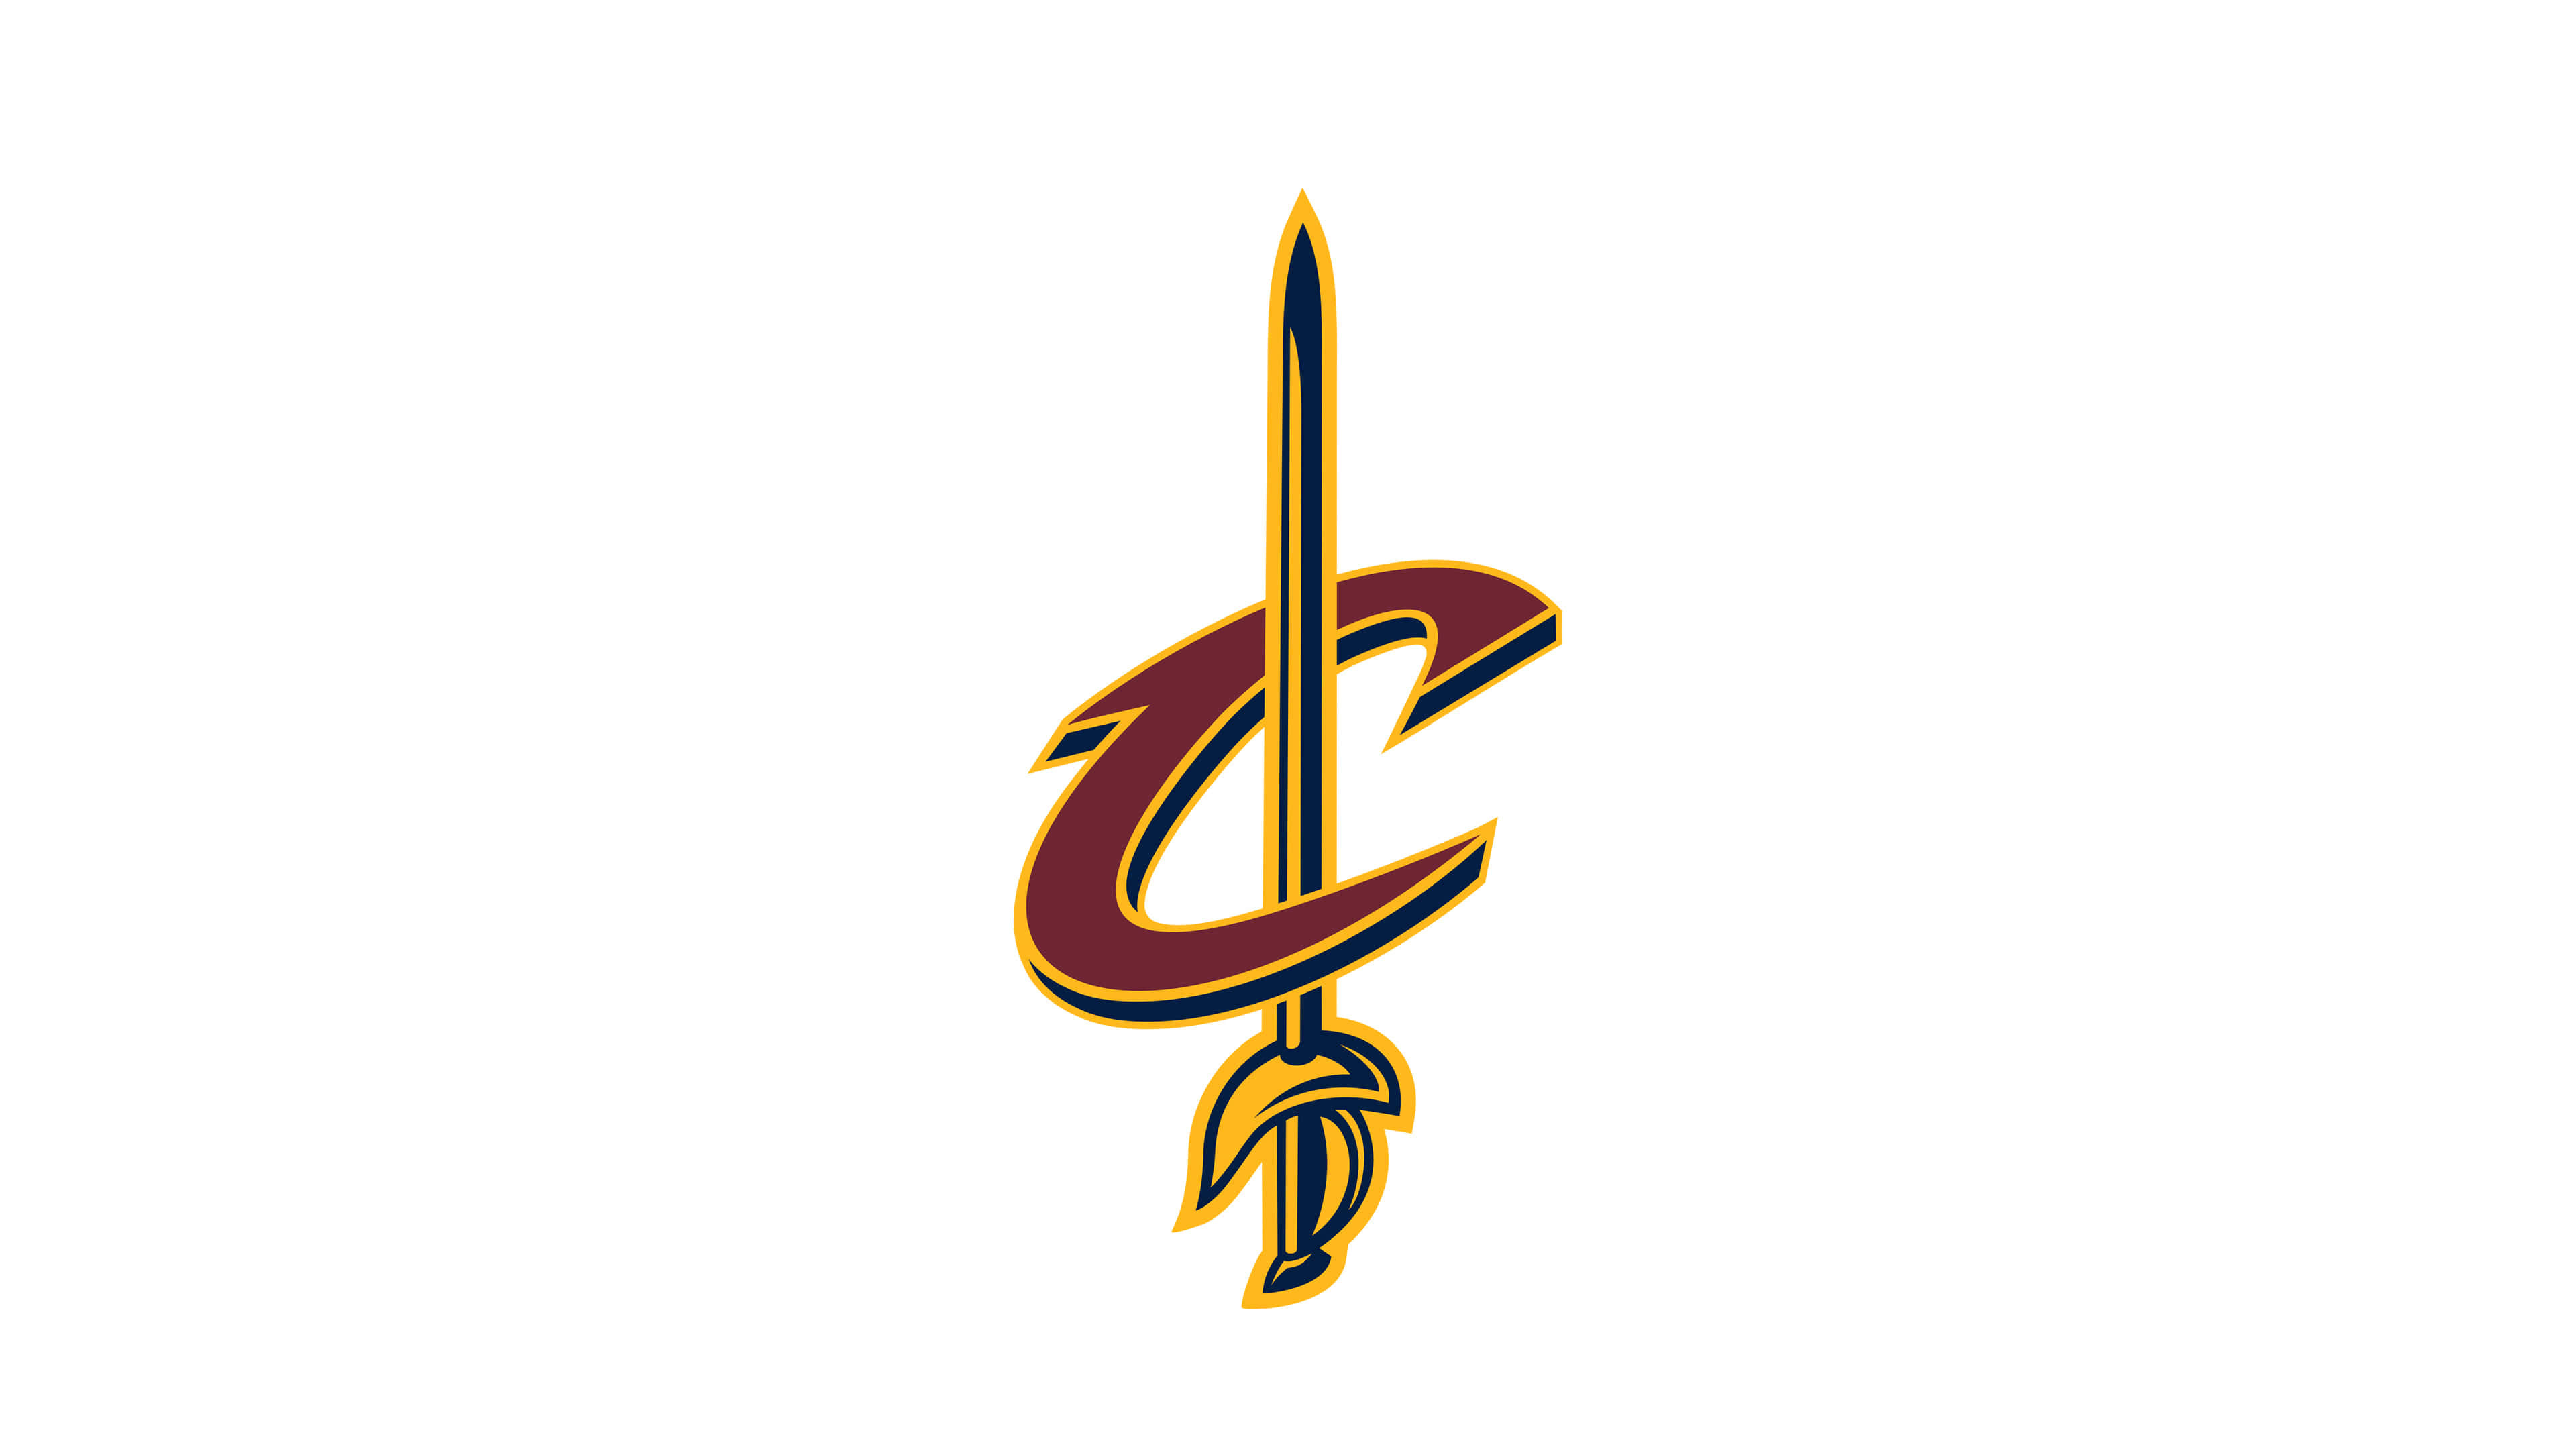 Cleveland Cavaliers: The team began play as an expansion team in 1970, NBA. 3840x2160 4K Background.